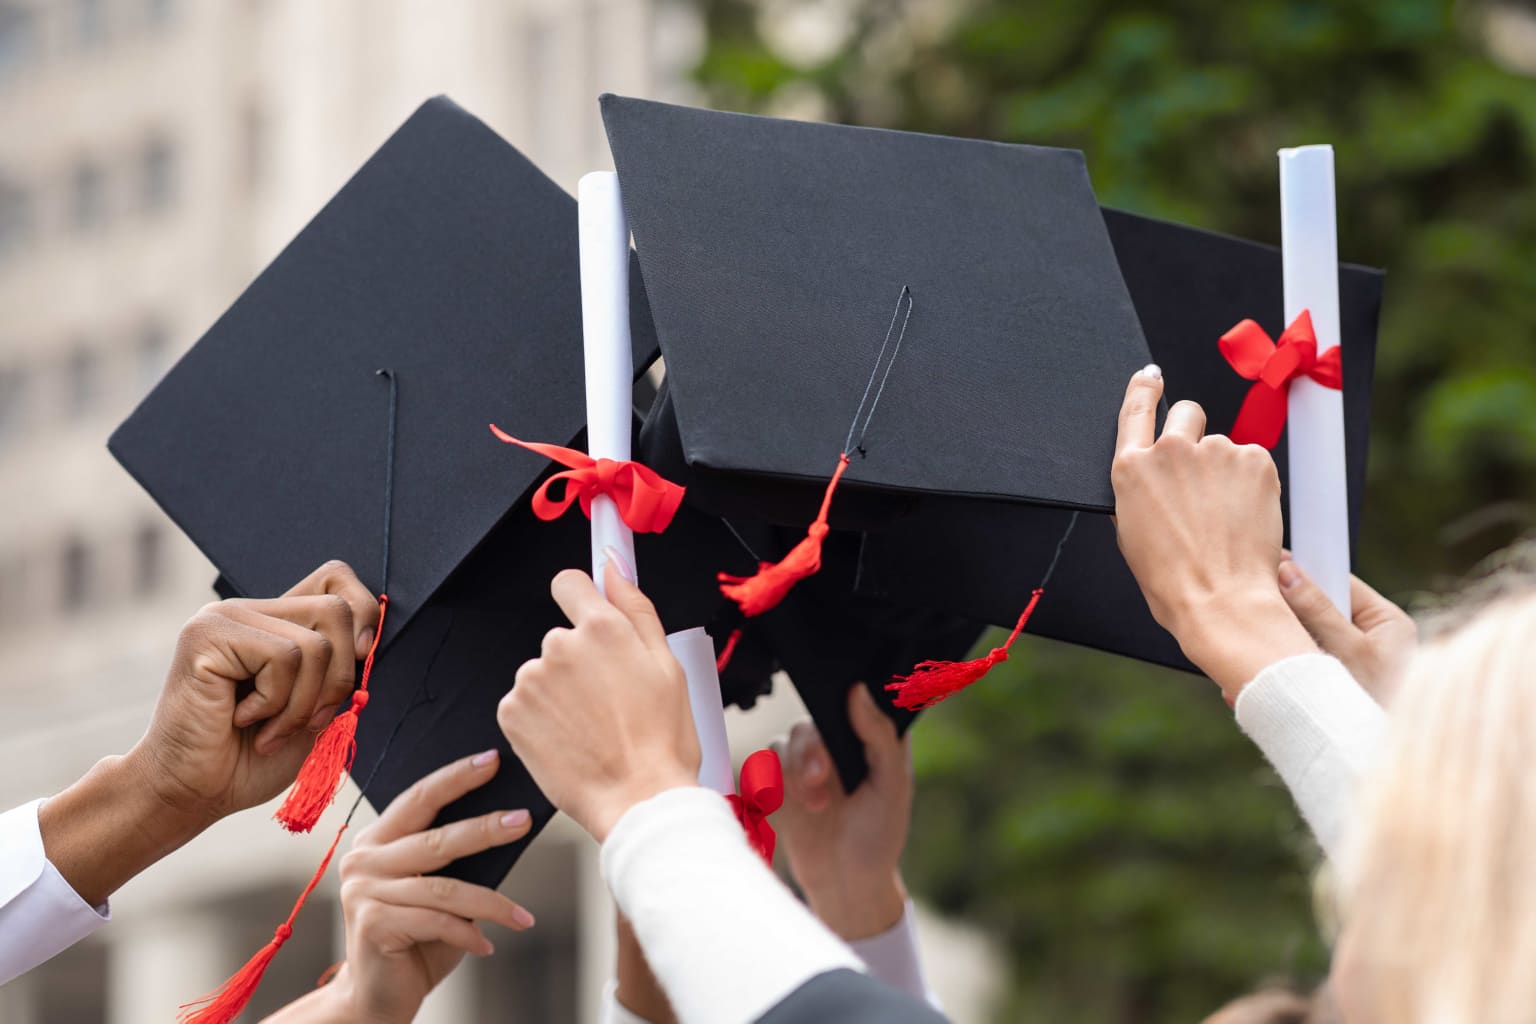 graduation-hats-and-diplomas-in-students-hands-cl-2023-11-27-05-10-15-utc-compressed